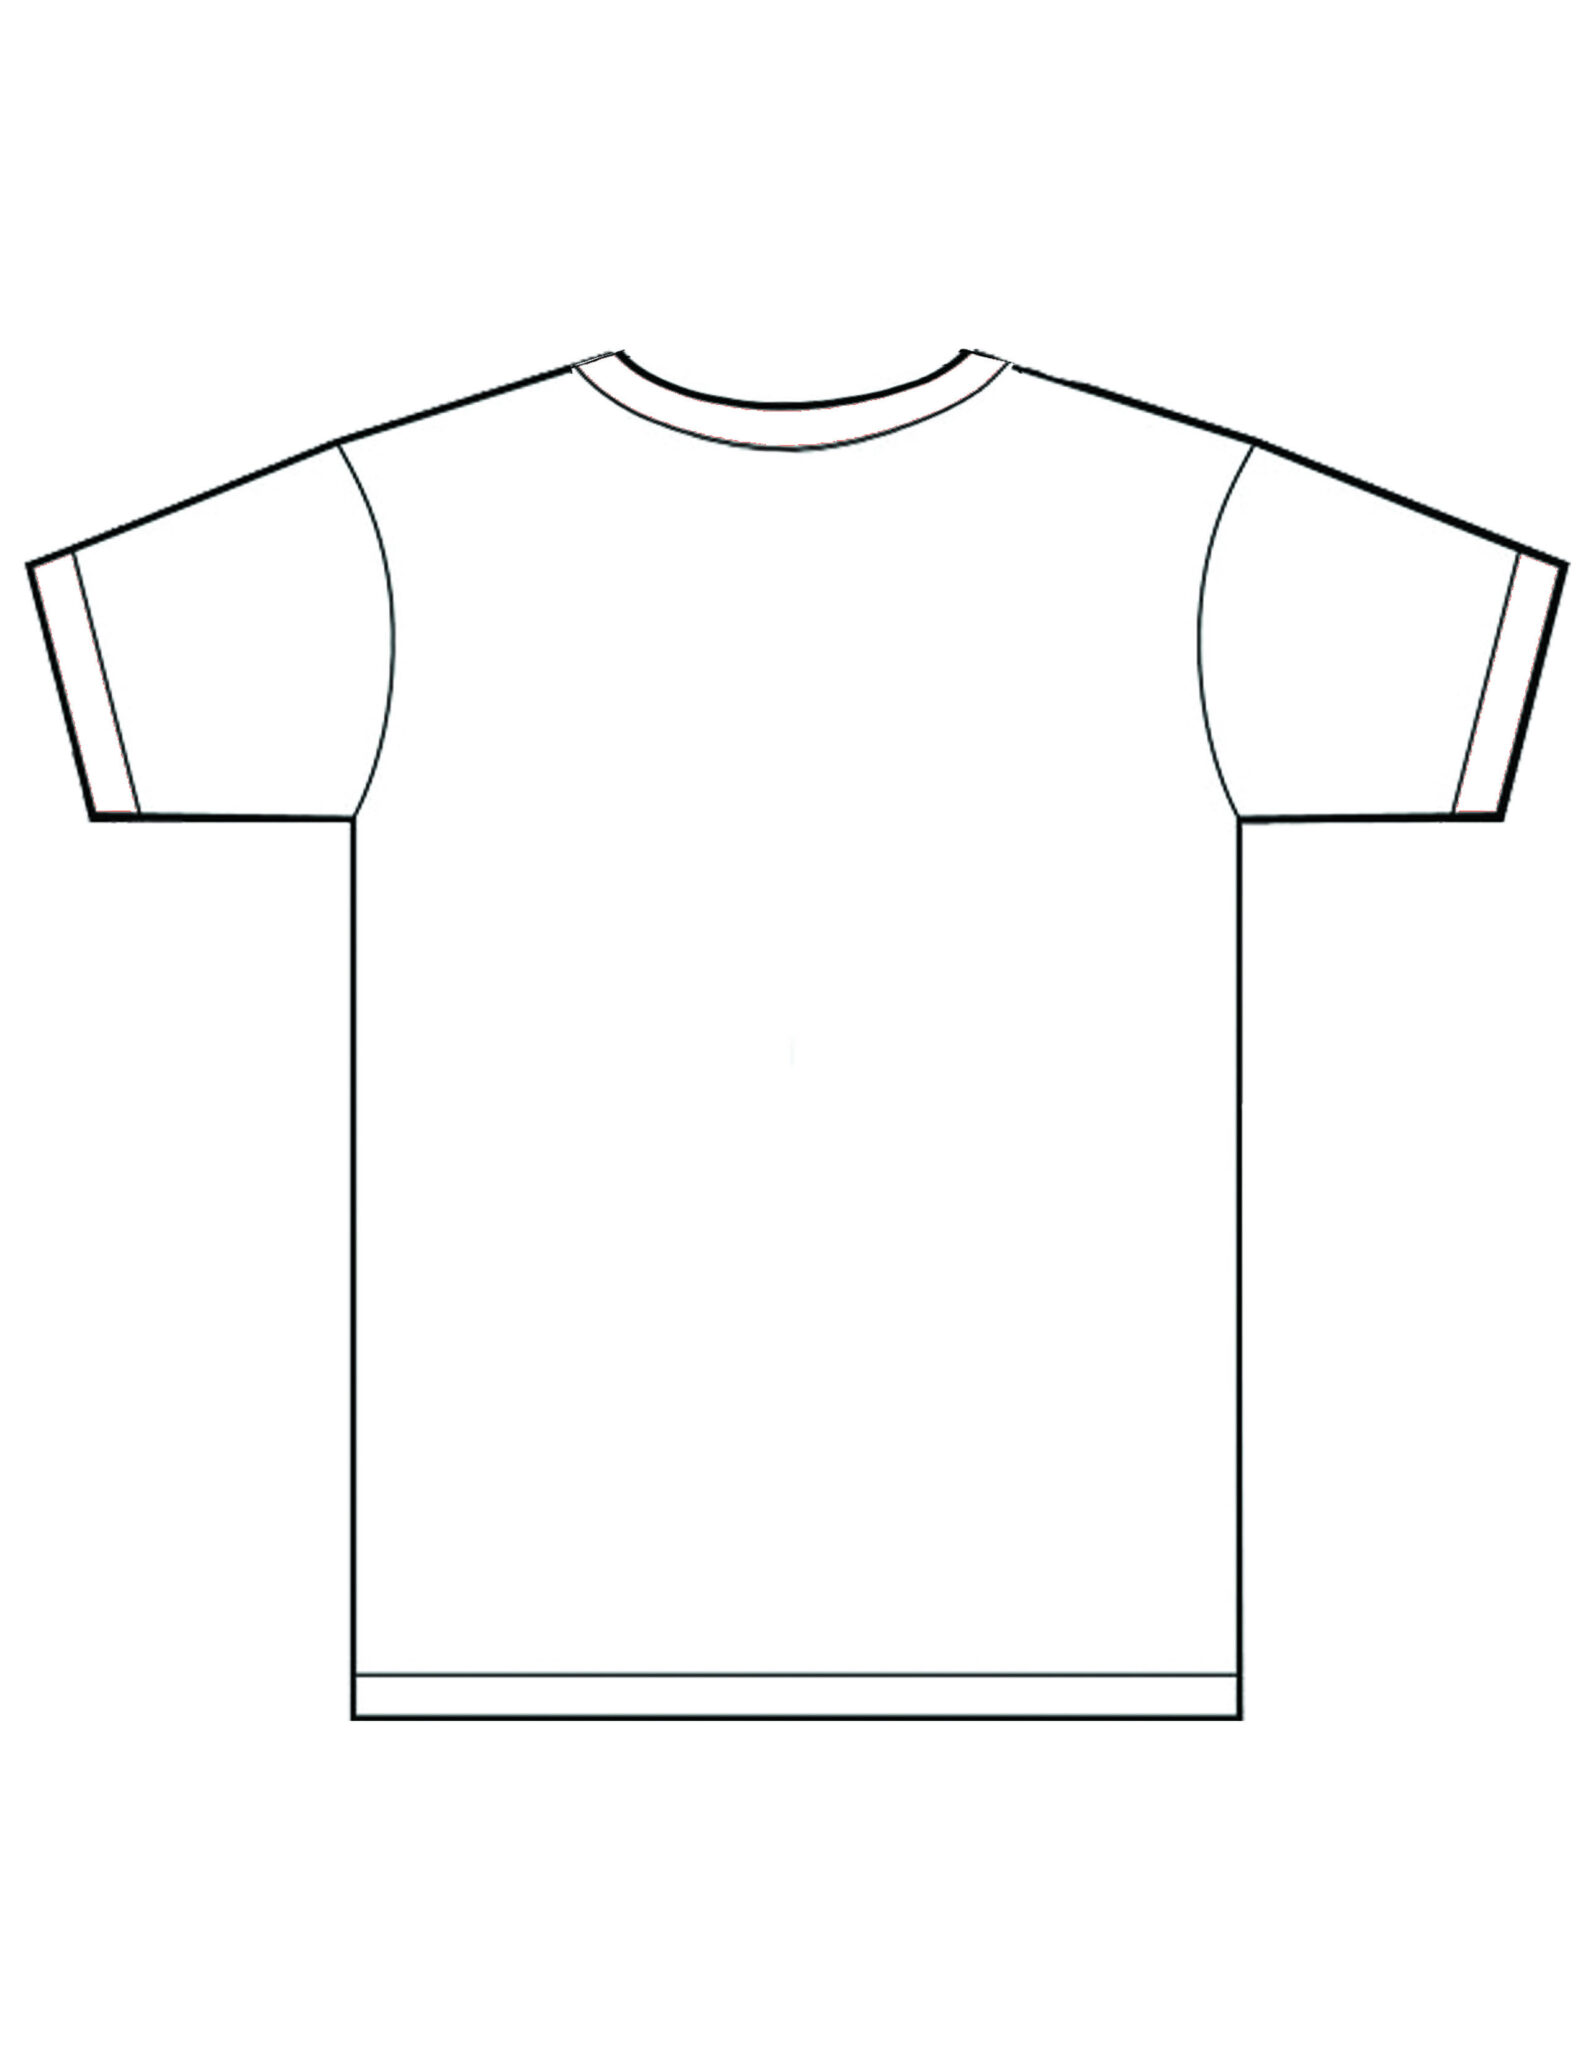 Photoshop T Shirt Template Colona rsd7 Within Blank T Shirt Design Template Psd Best Sample